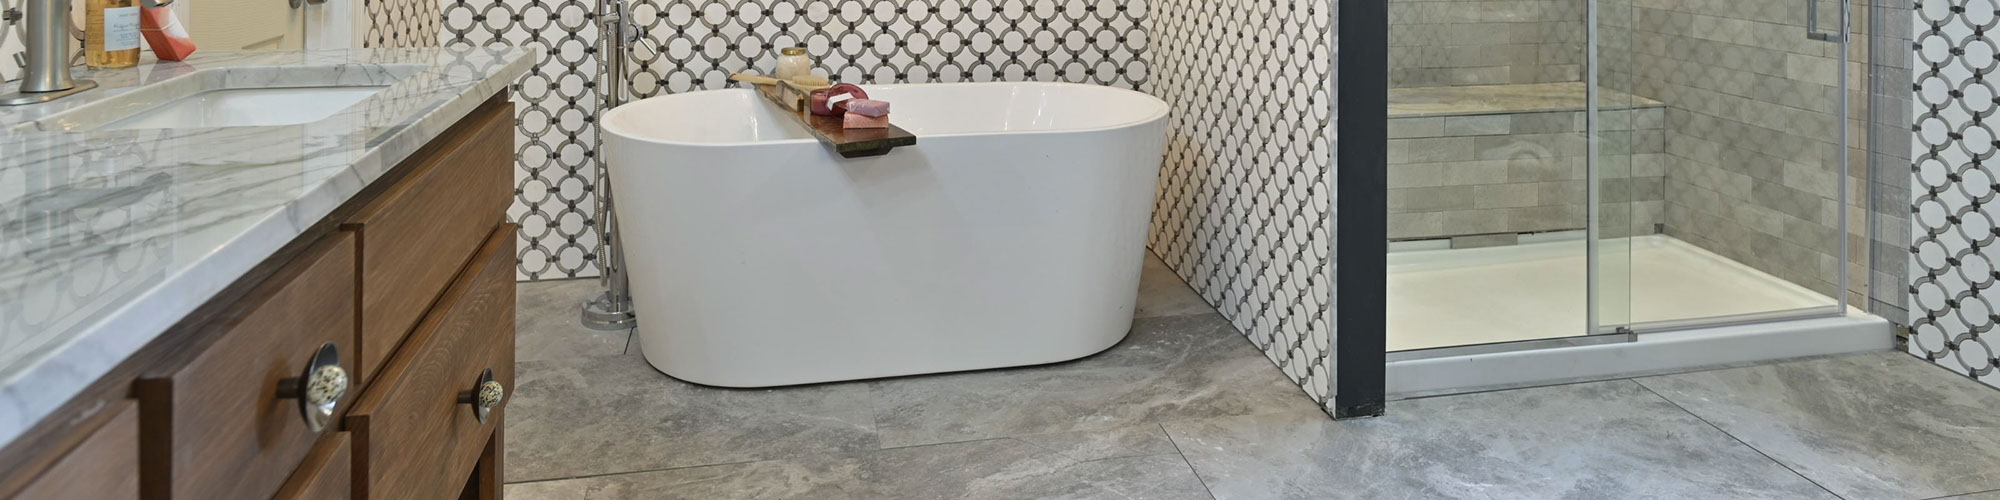 Bathroom with free standing bathtub in front of wainscoting of white marble tile with gray rings and shower with gray tile and niche with matching marble tile with rings.